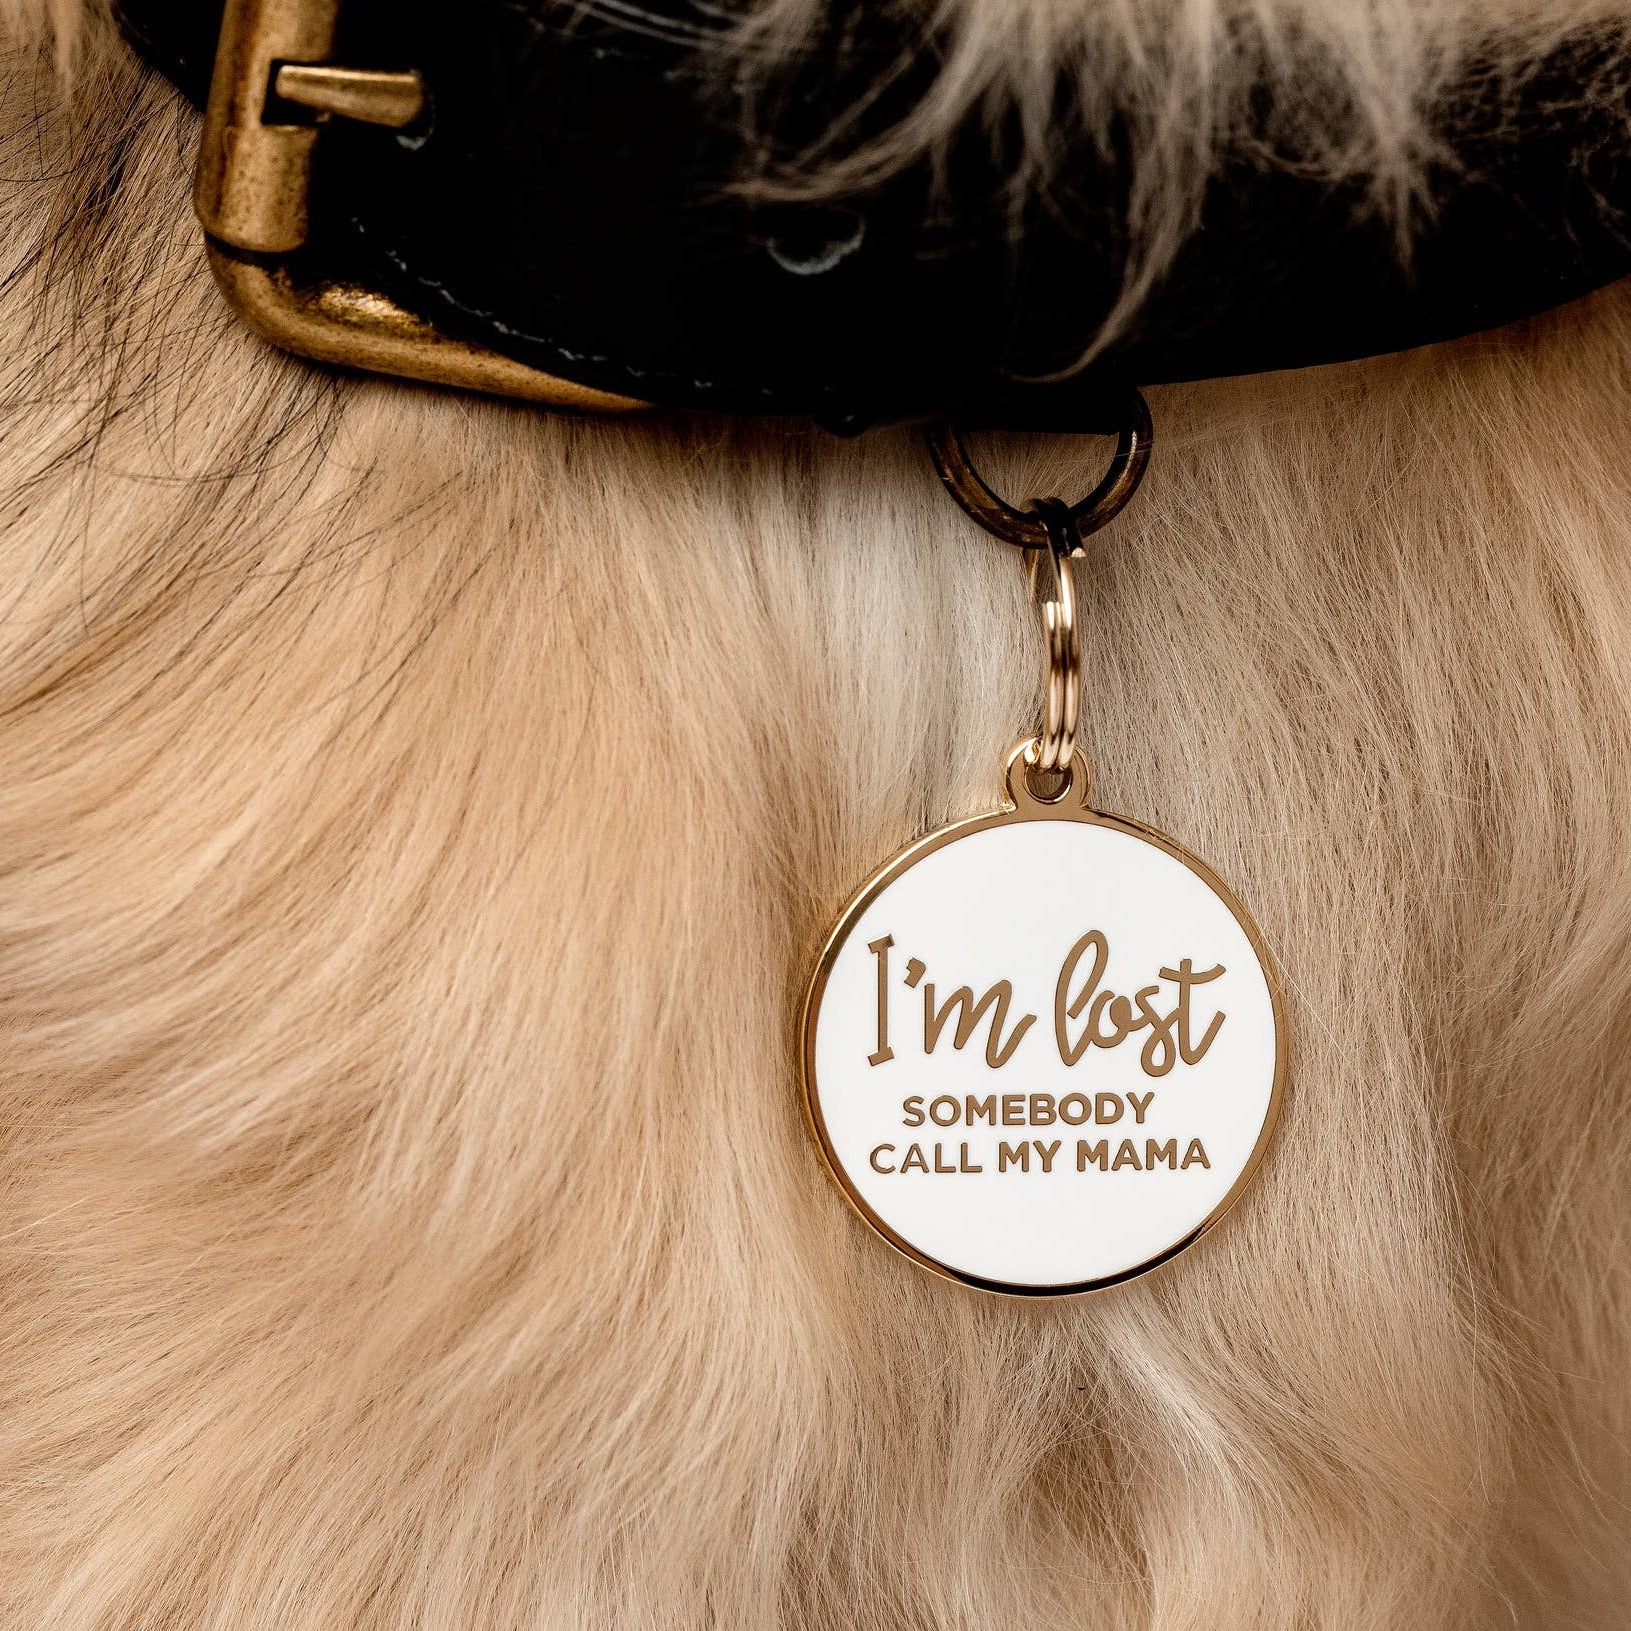 Customizable Engraved Pet ID Tags - Danshire Market and Design 